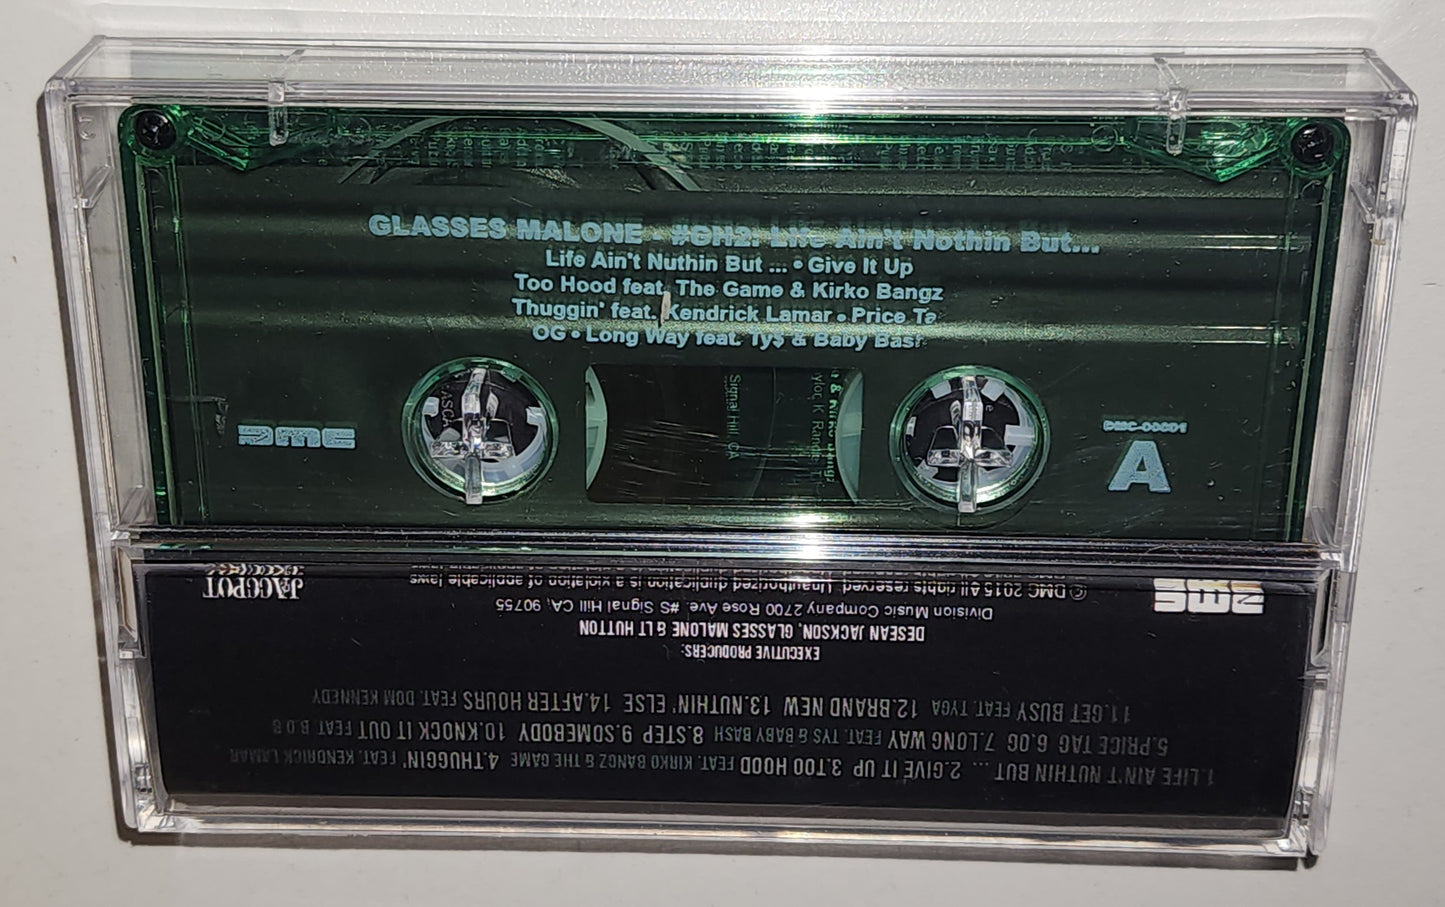 Glasses Malone - #GH2: Life Ain't Nuthin' But (Autographed Cassette Tape)